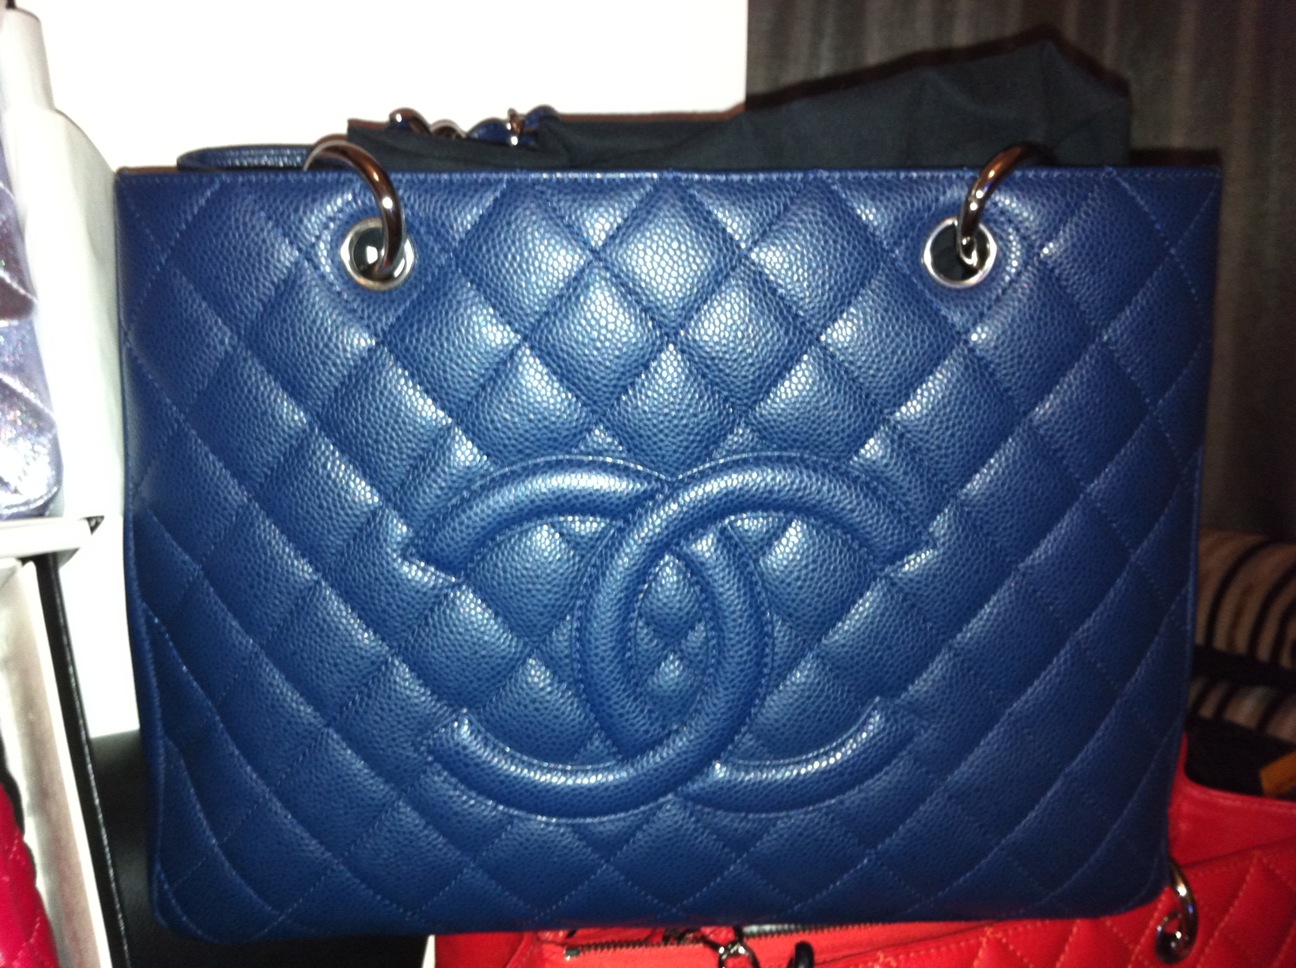 BAGS AVENUE: Brand new Chanel gst with silver hw